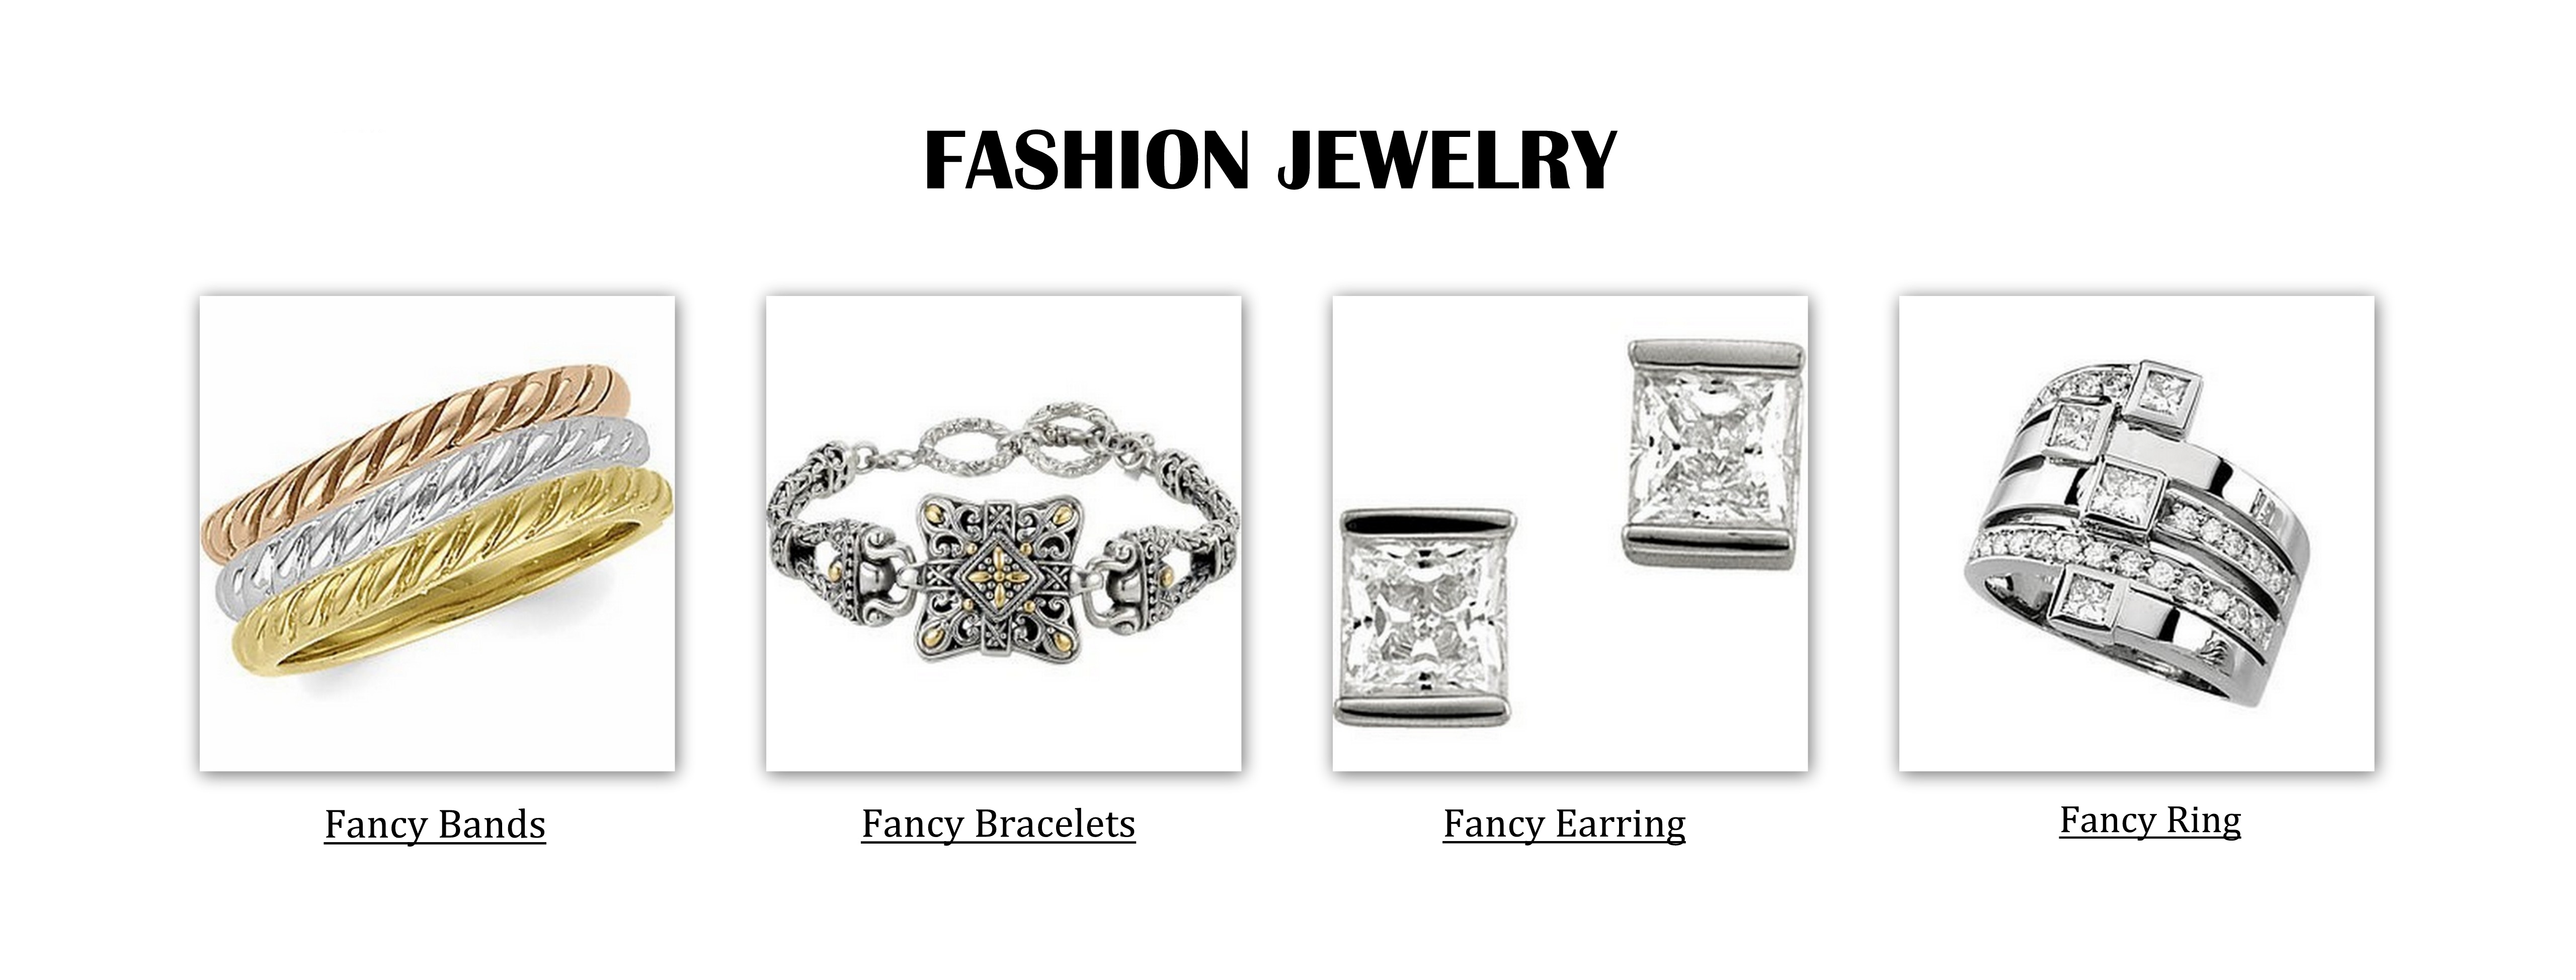 FASHION JEWELRY: THINGS TO KEEP IN MIND